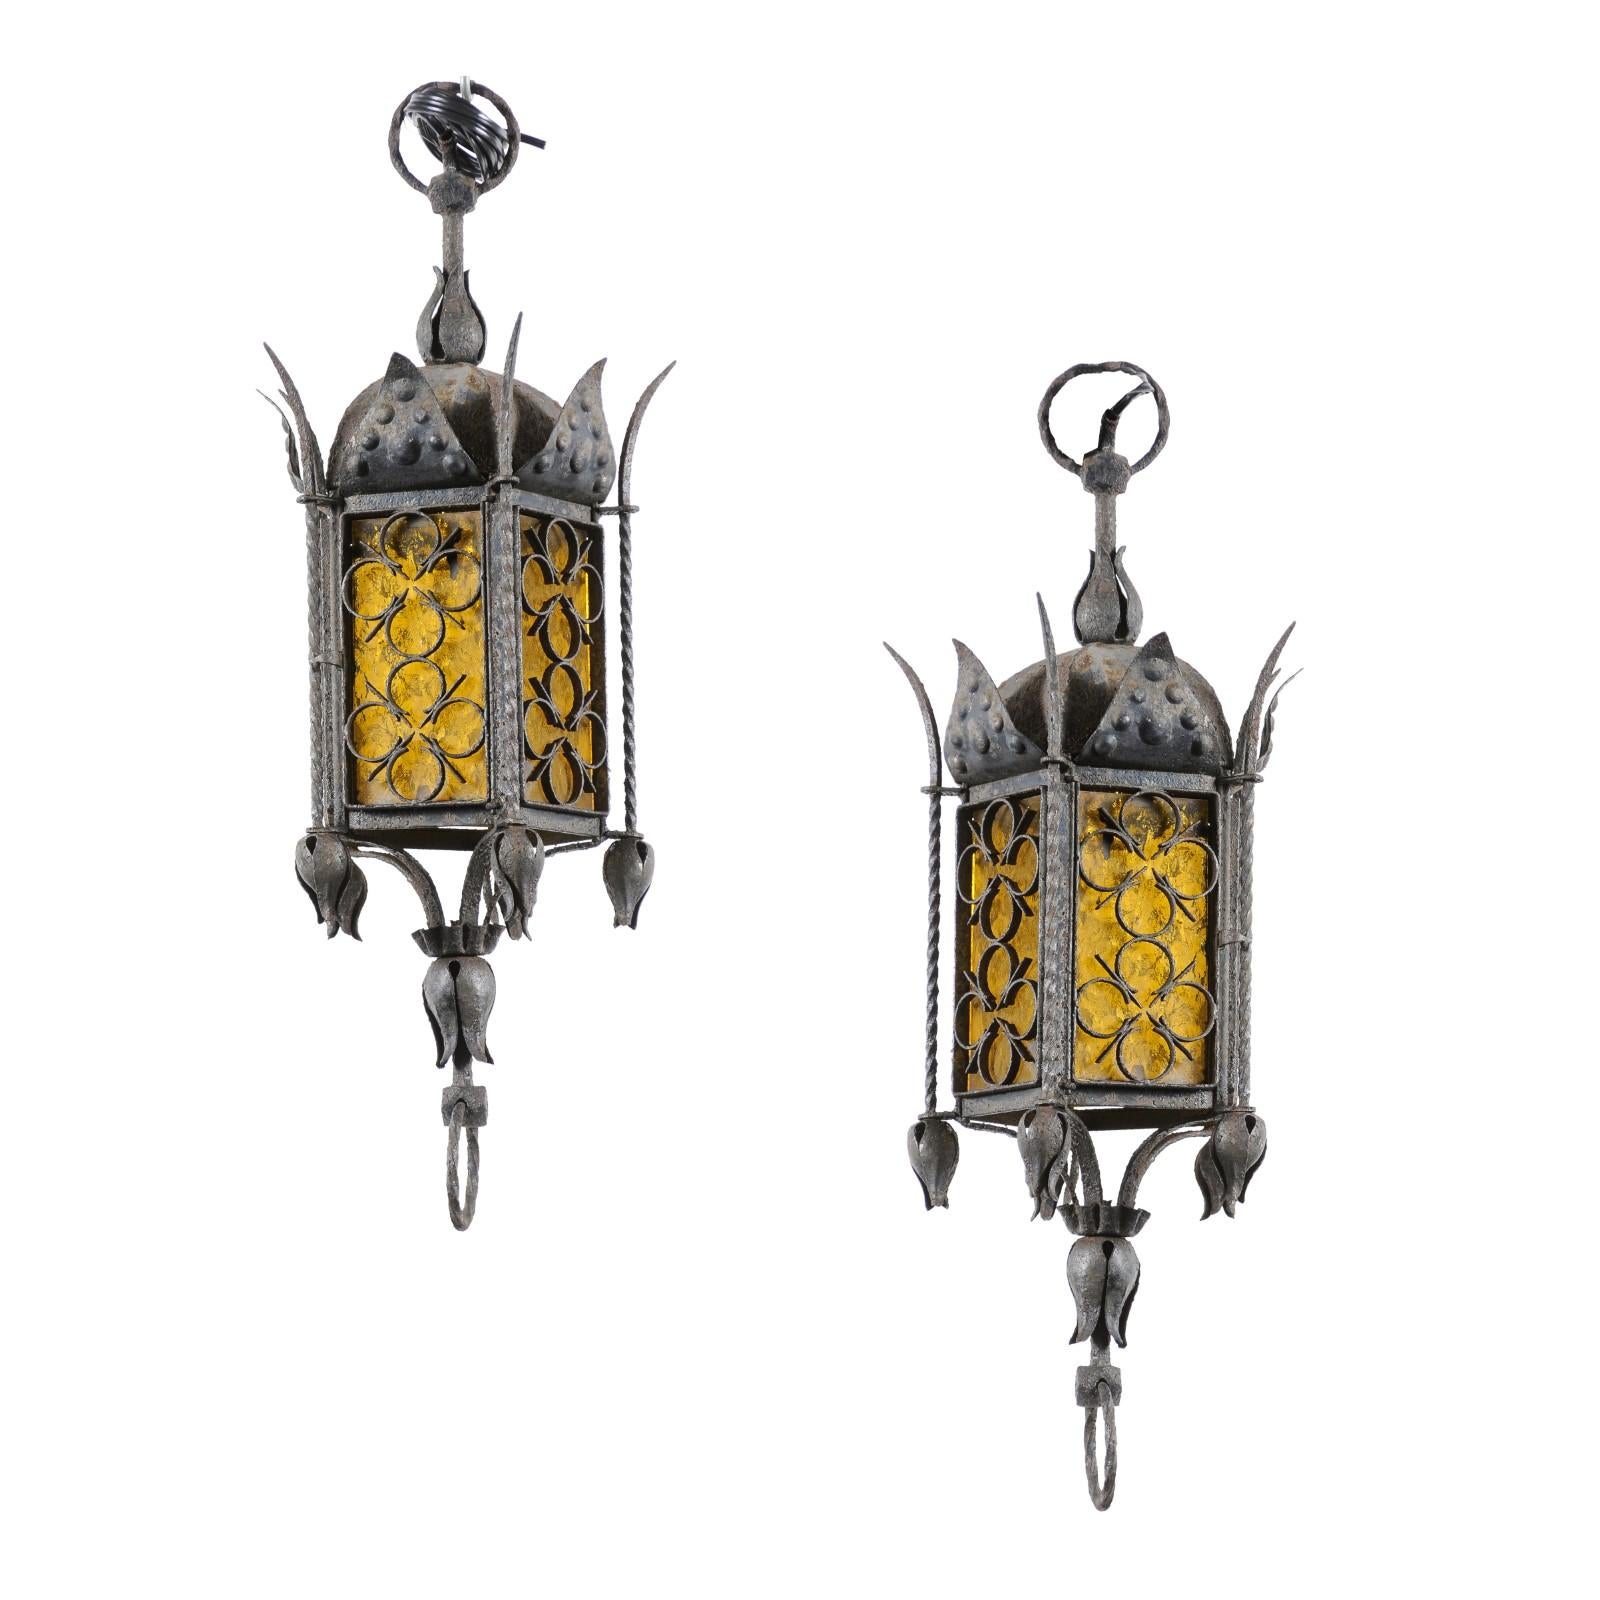 Set of 3 Wrought Iron Hanging Lanterns with Amber Glass, Italy late 19th Century. PRICE PER EACH.